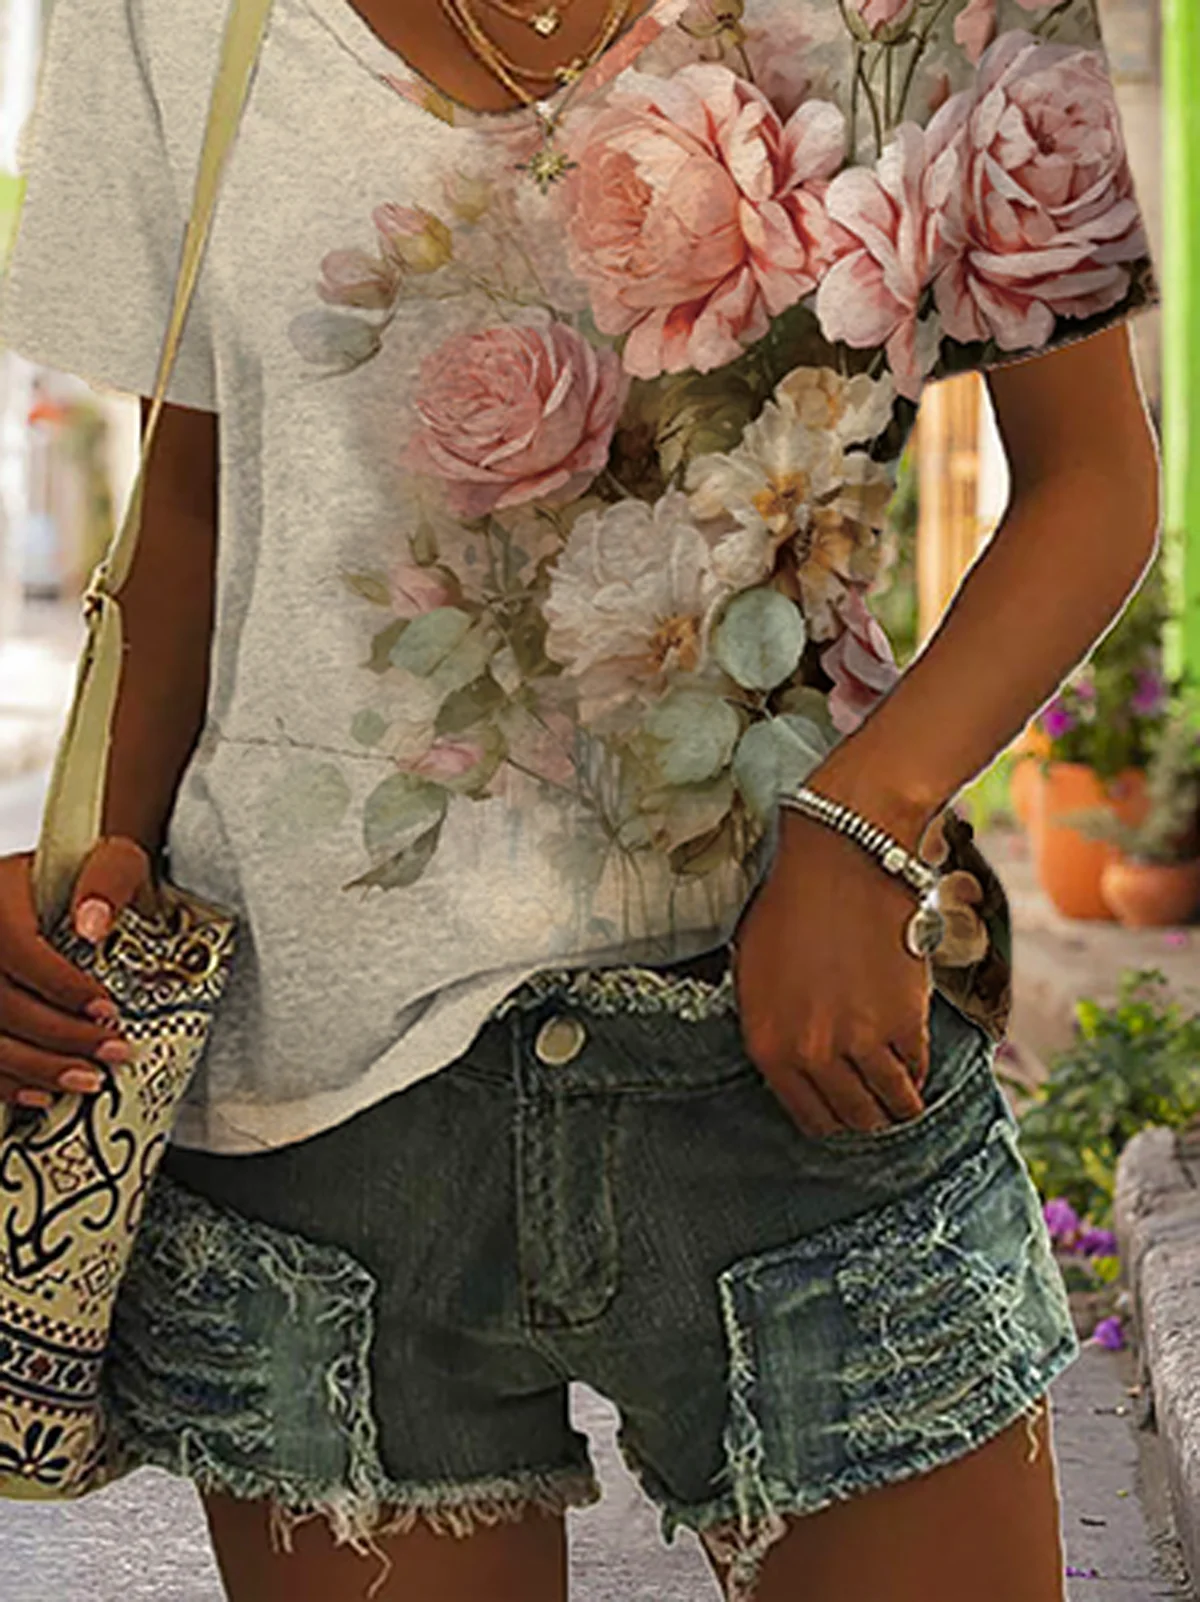 Women's Short Sleeve Tee/T-shirt Summer Floral Jersey V Neck Daily Going Out Casual Top Multicolor